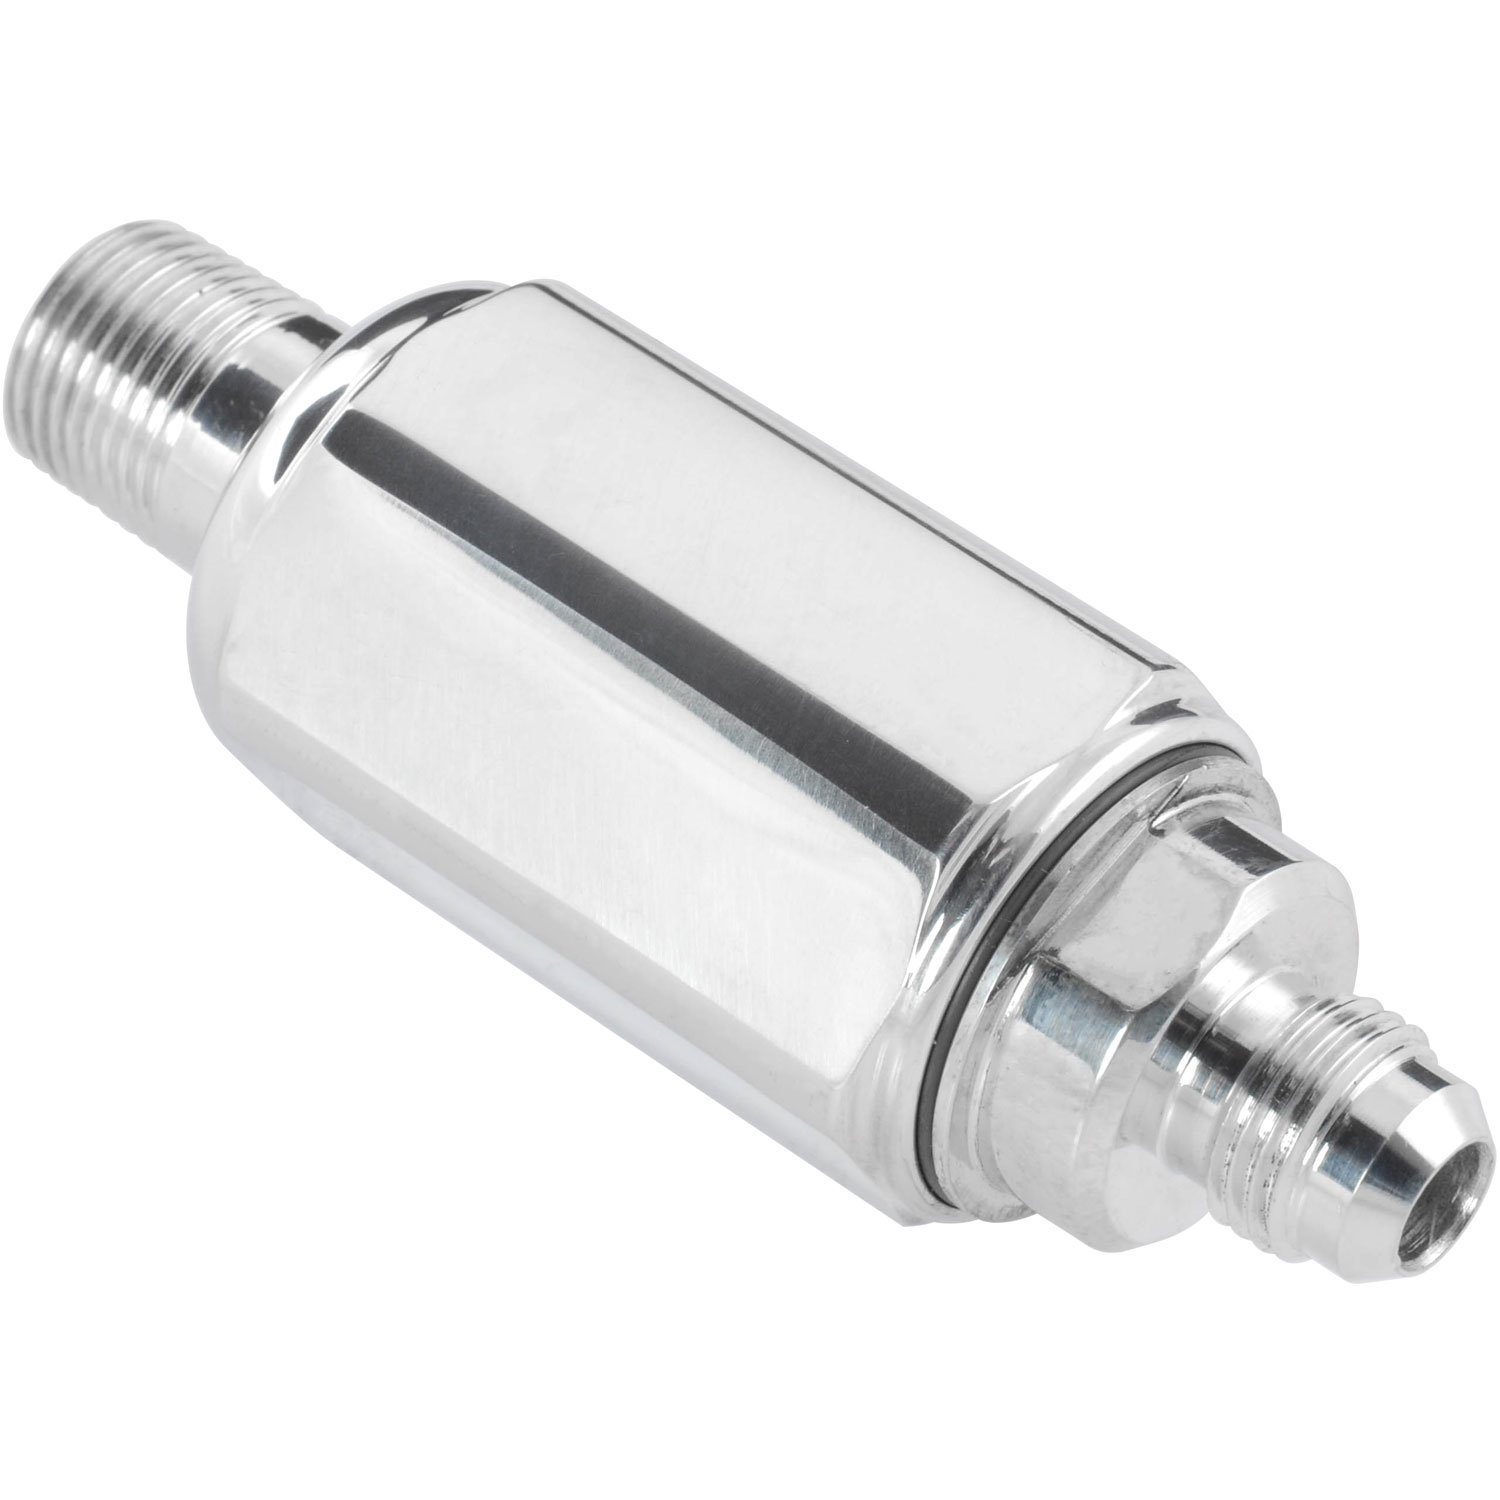 Compact Billet Aluminum In-Line Fuel Filter, 2 5/16 in. Long [3/8 in. NPT Male to -6 AN Male, Polished]